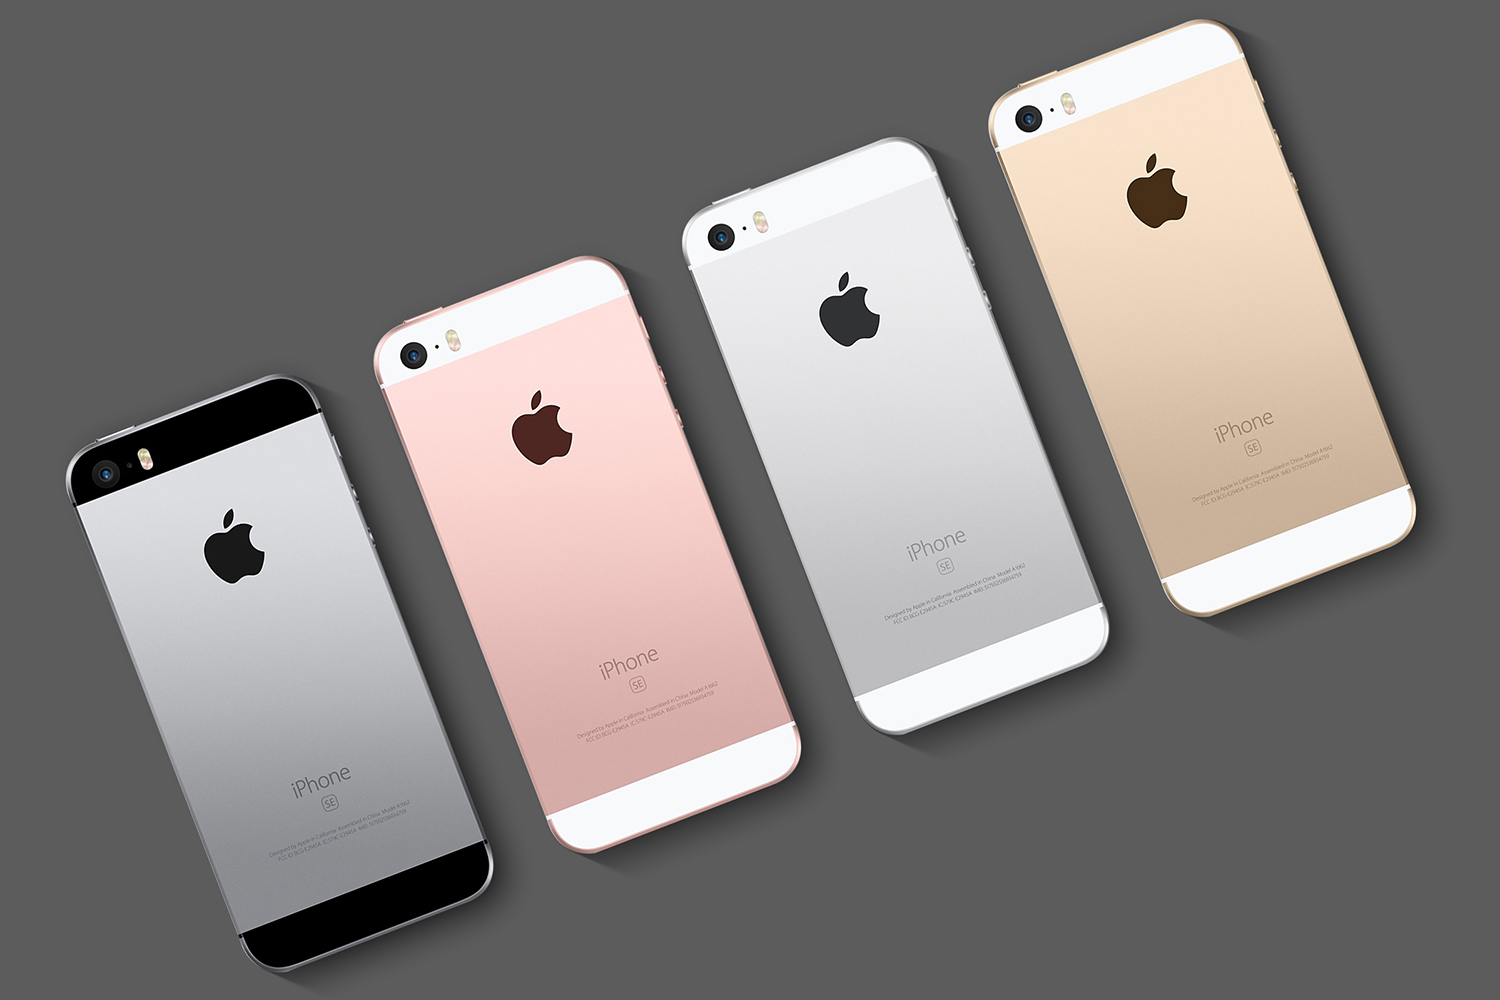 European regulatory filing suggests iPhone SE 2 could arrive within next month